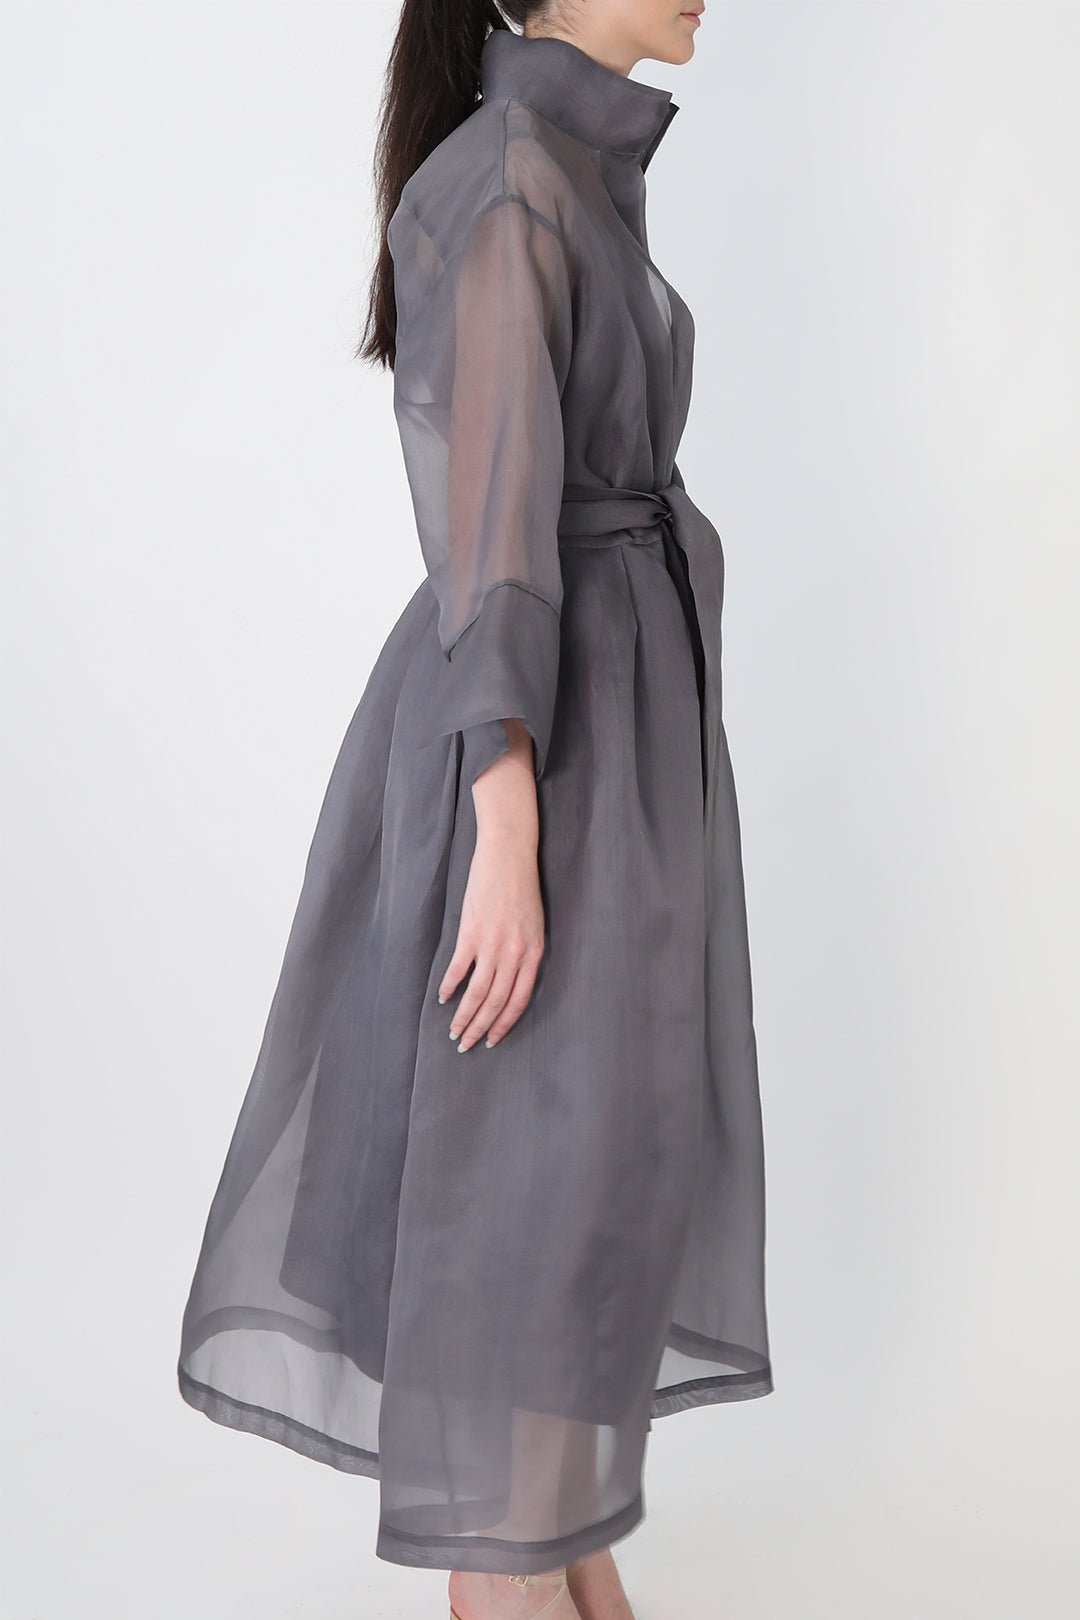 GABRIELLE DRESS IN SILK ORGANZA SEABREEZE - PRE-ORDER AVAILABLE - Jarbo